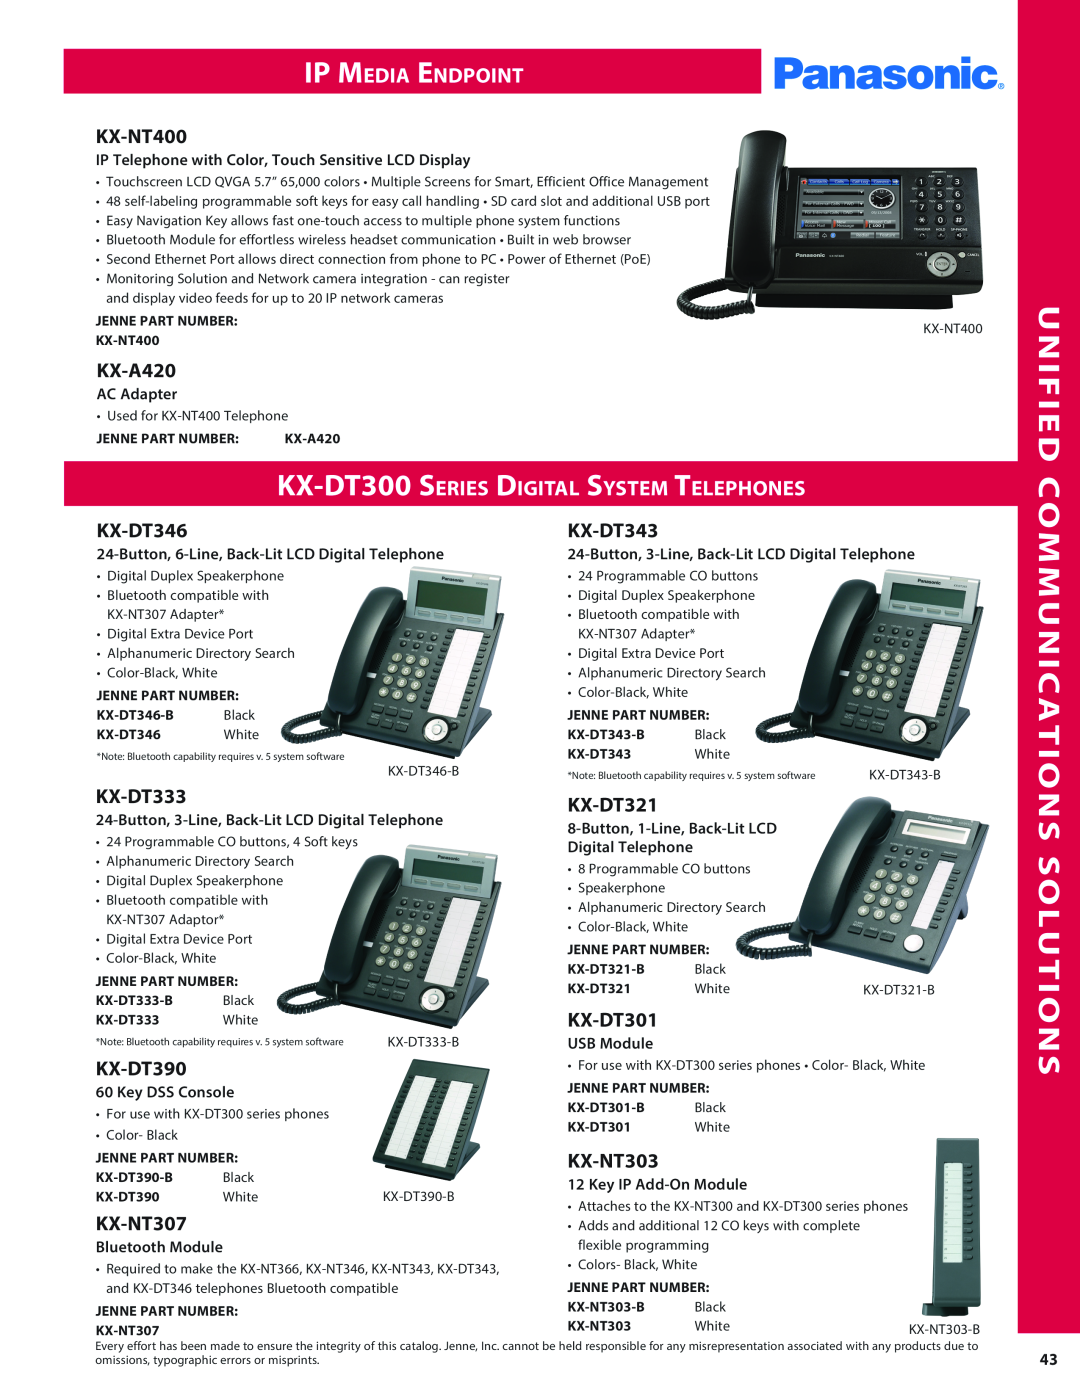 Panasonic PMPU2000 manual Unified Communications, IP Media Endpoint, KX-DT300Series Digital System Telephones, Solutions 